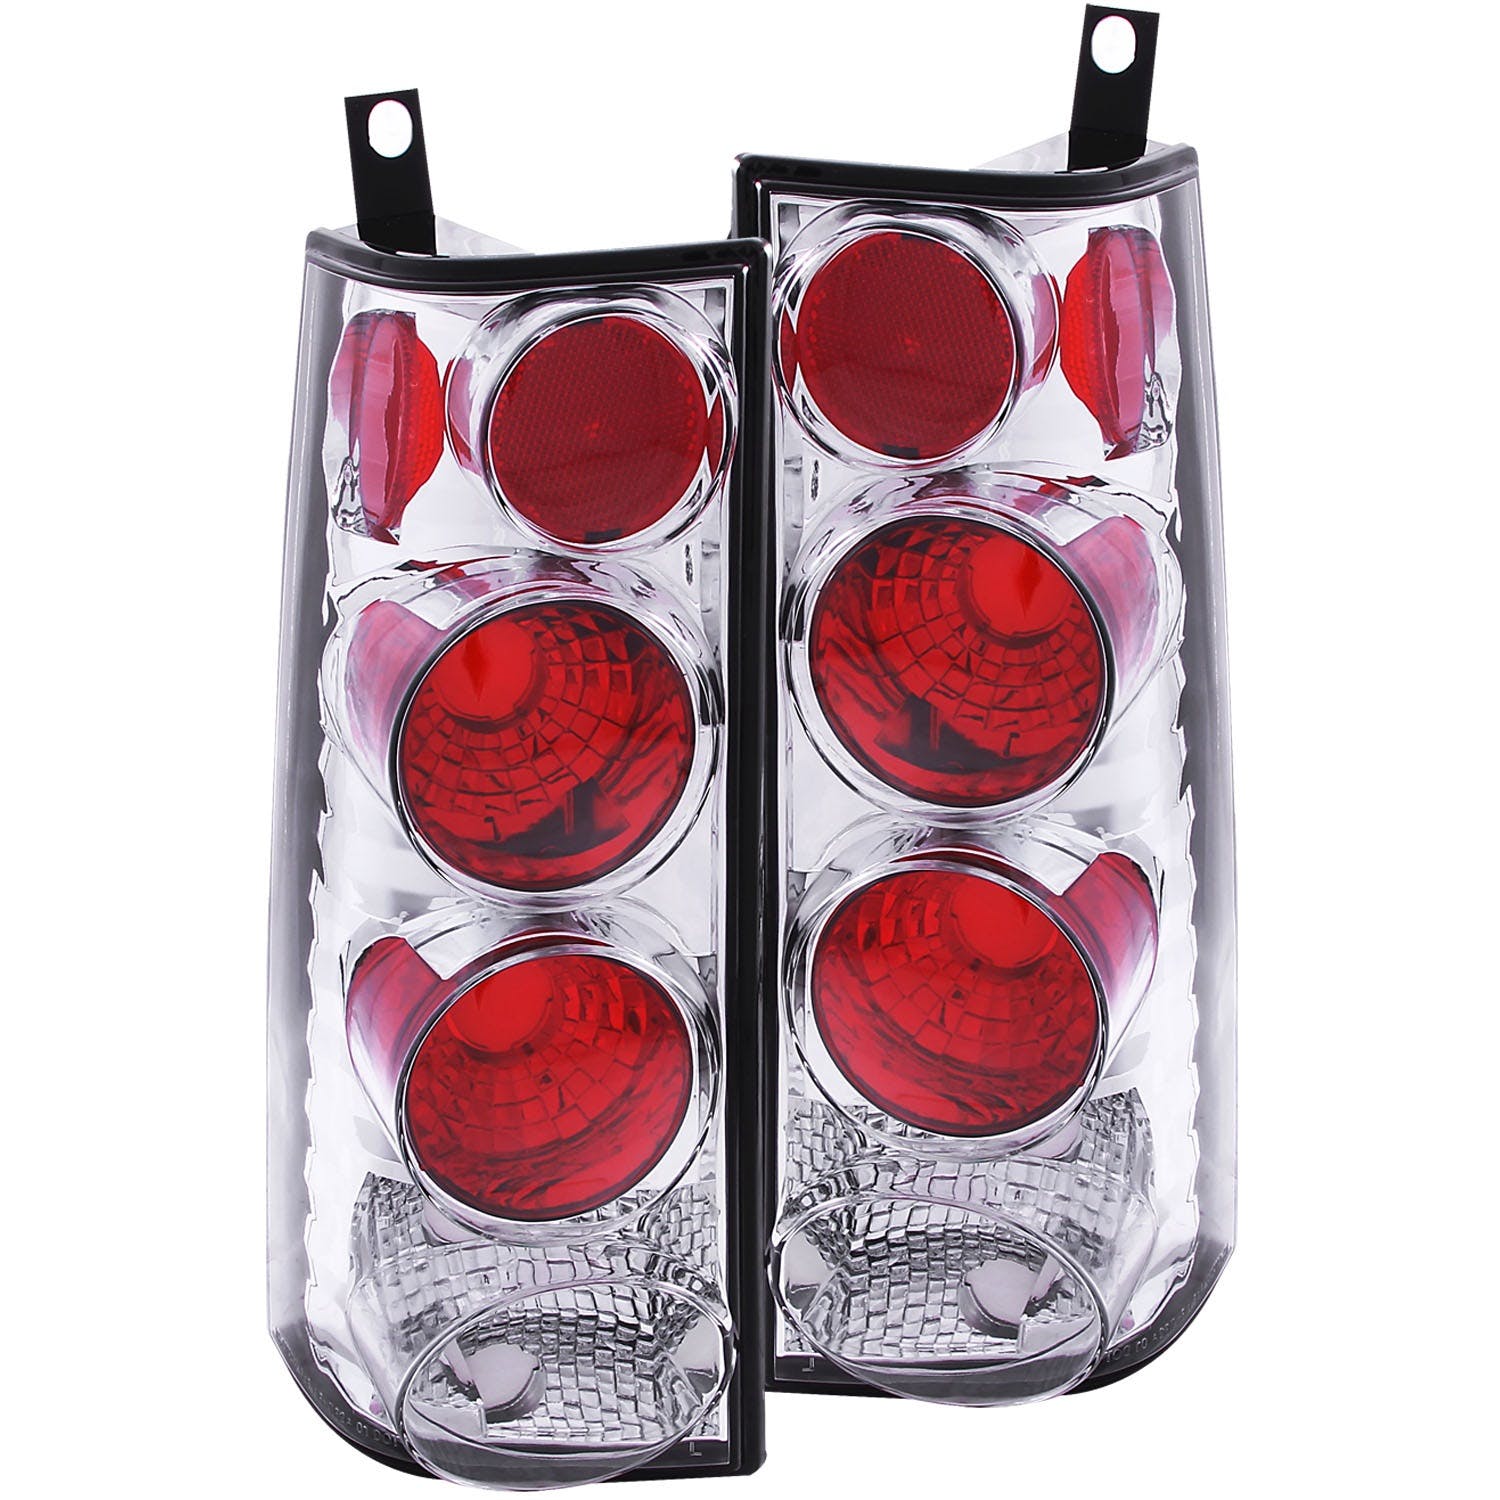 AnzoUSA 211147 Taillights Chrome